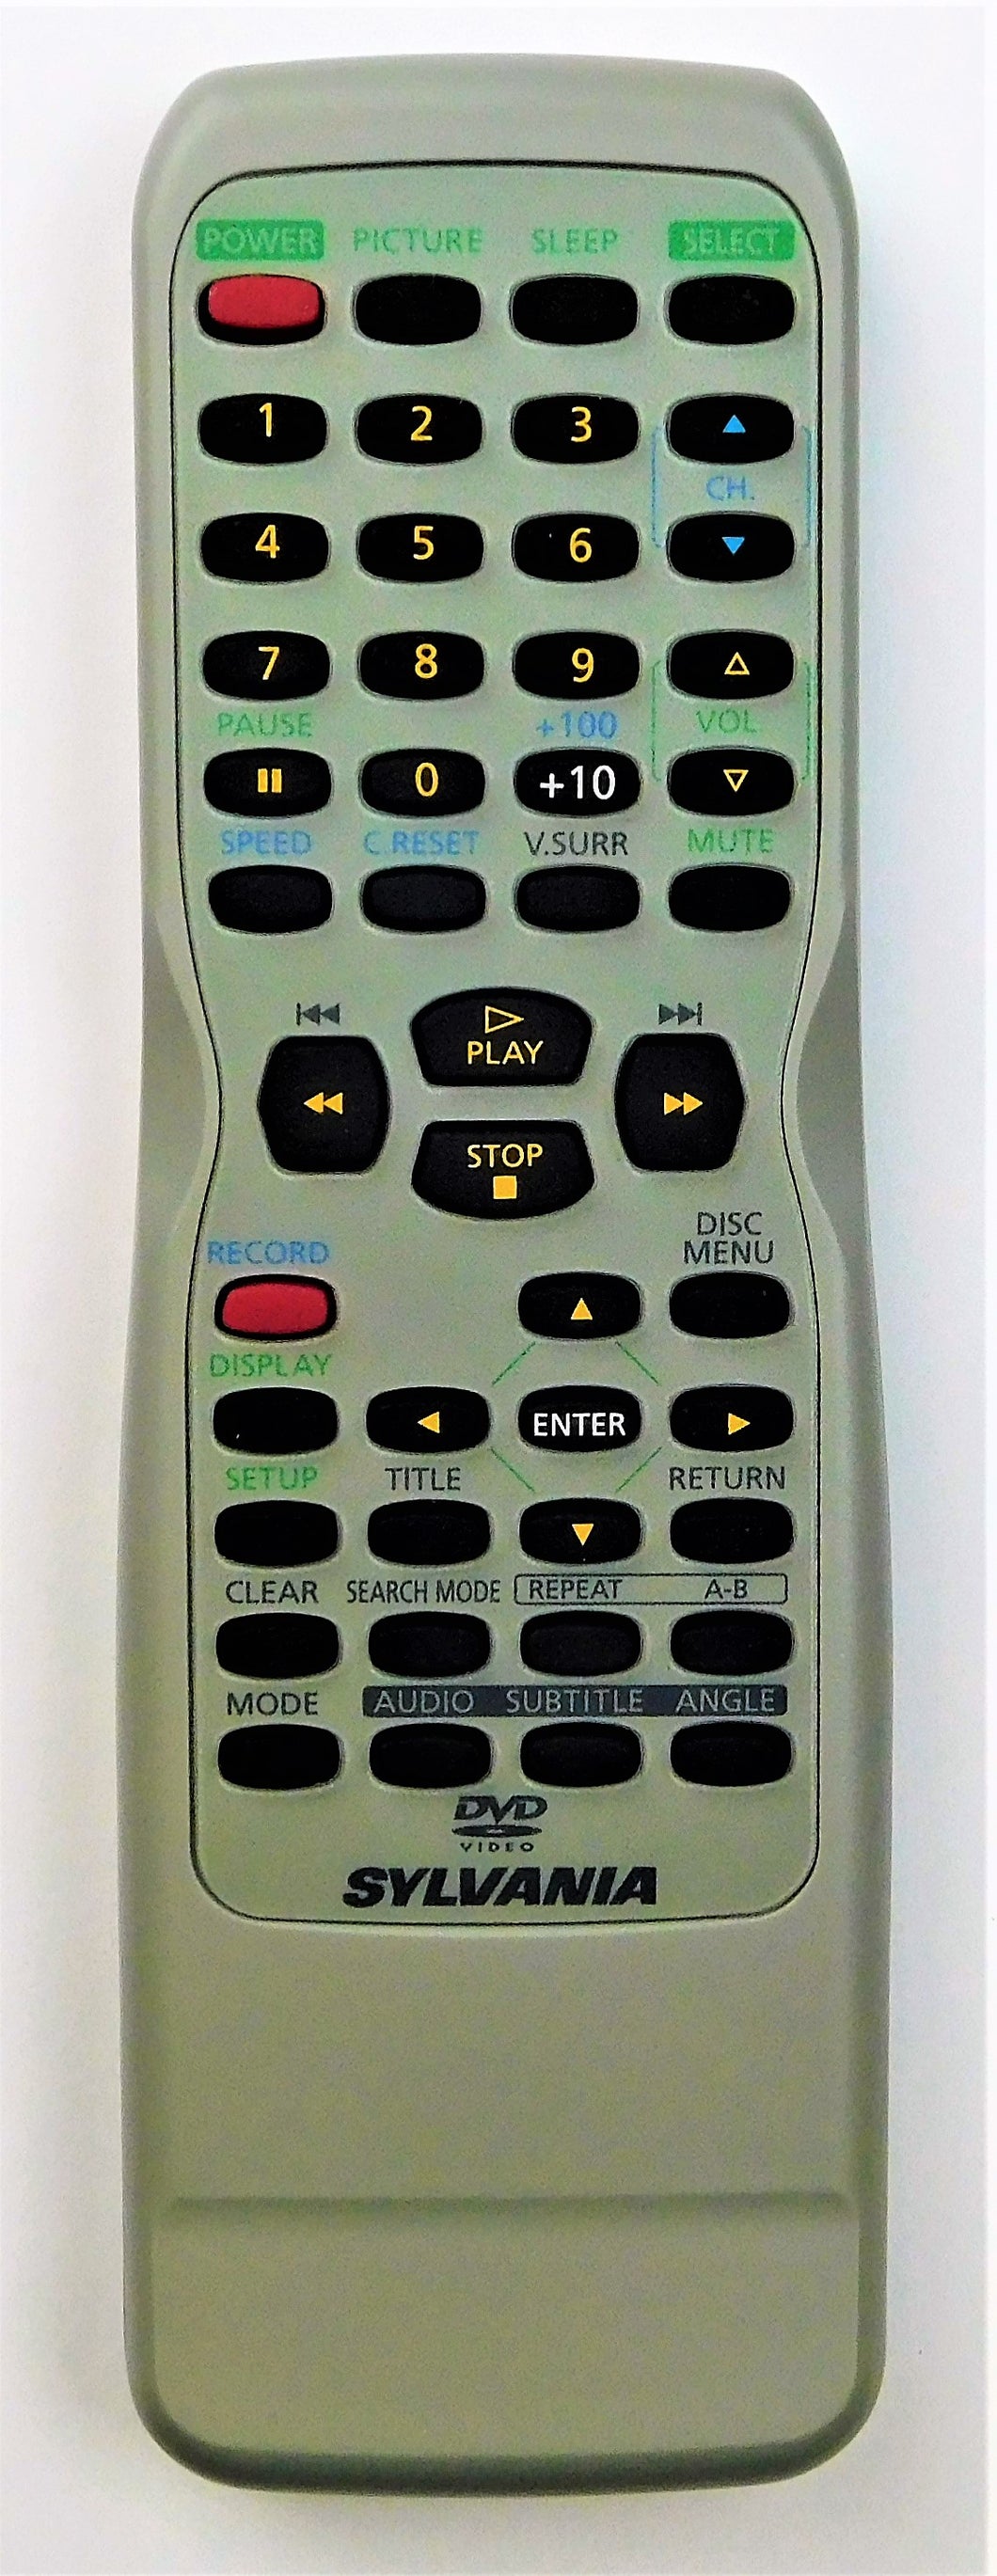 OEM replacement remote control for Emerson, Sylvania CRT TV DVD & VCR COMBOs NE227UD